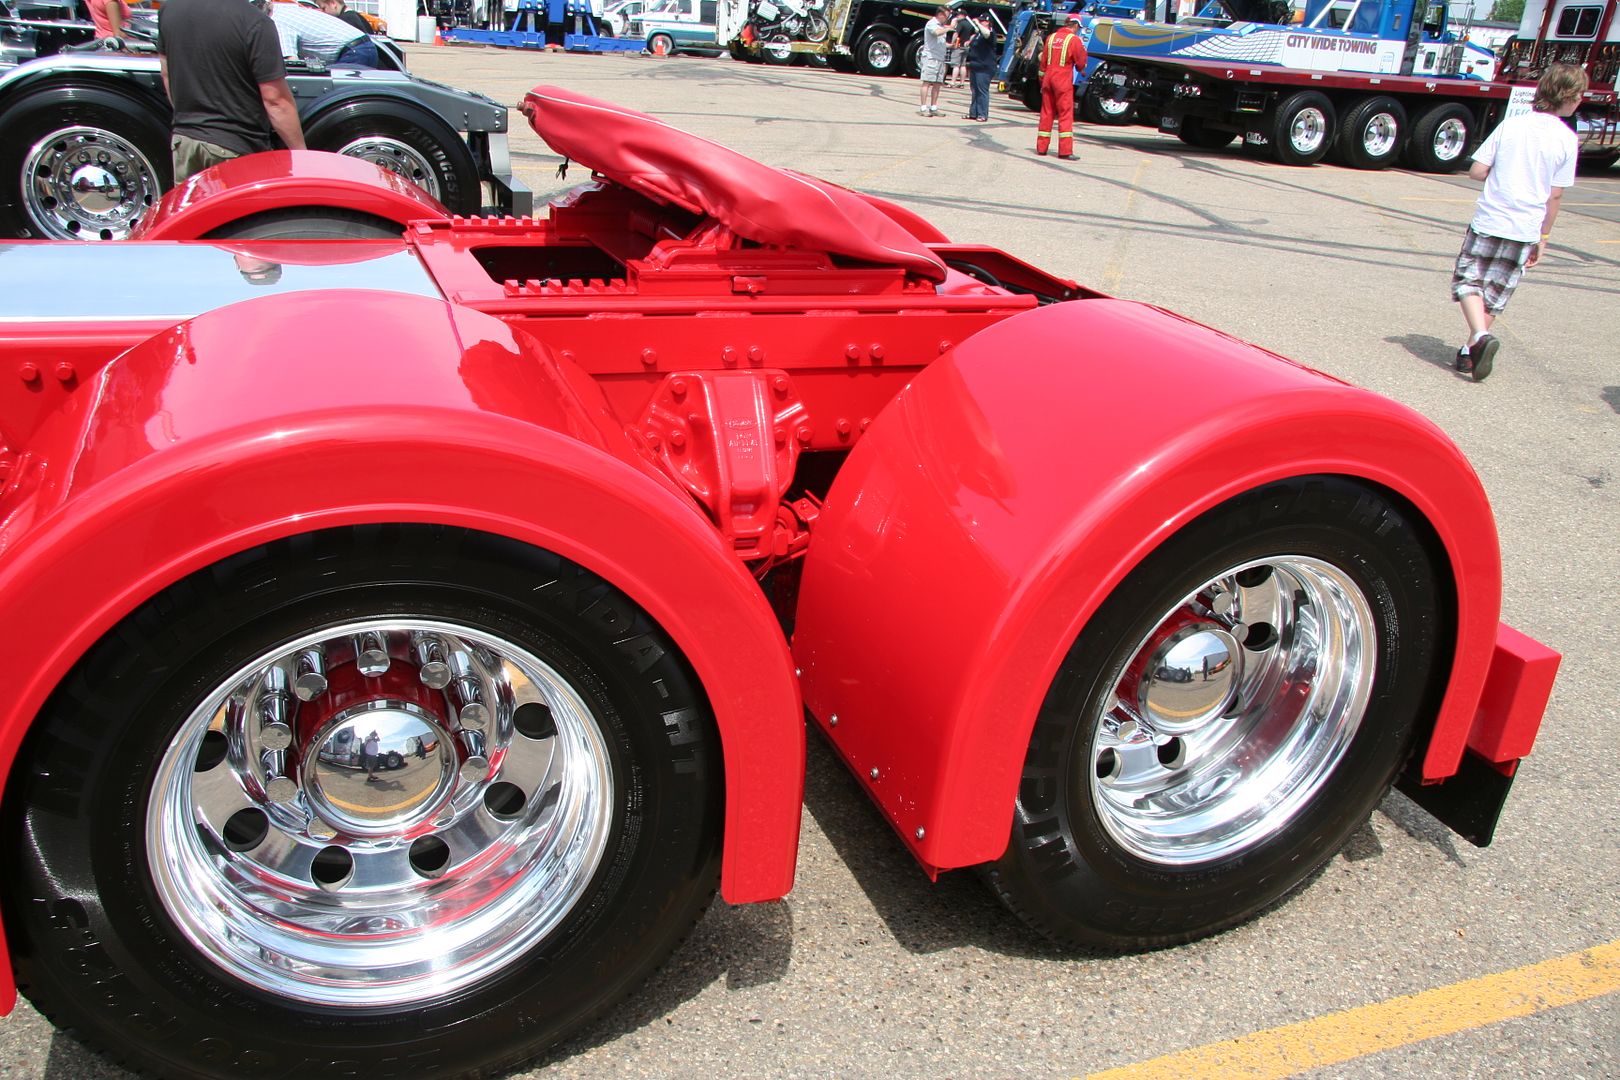 My first time to Red Deer: Truck show - beyond.ca car forums community